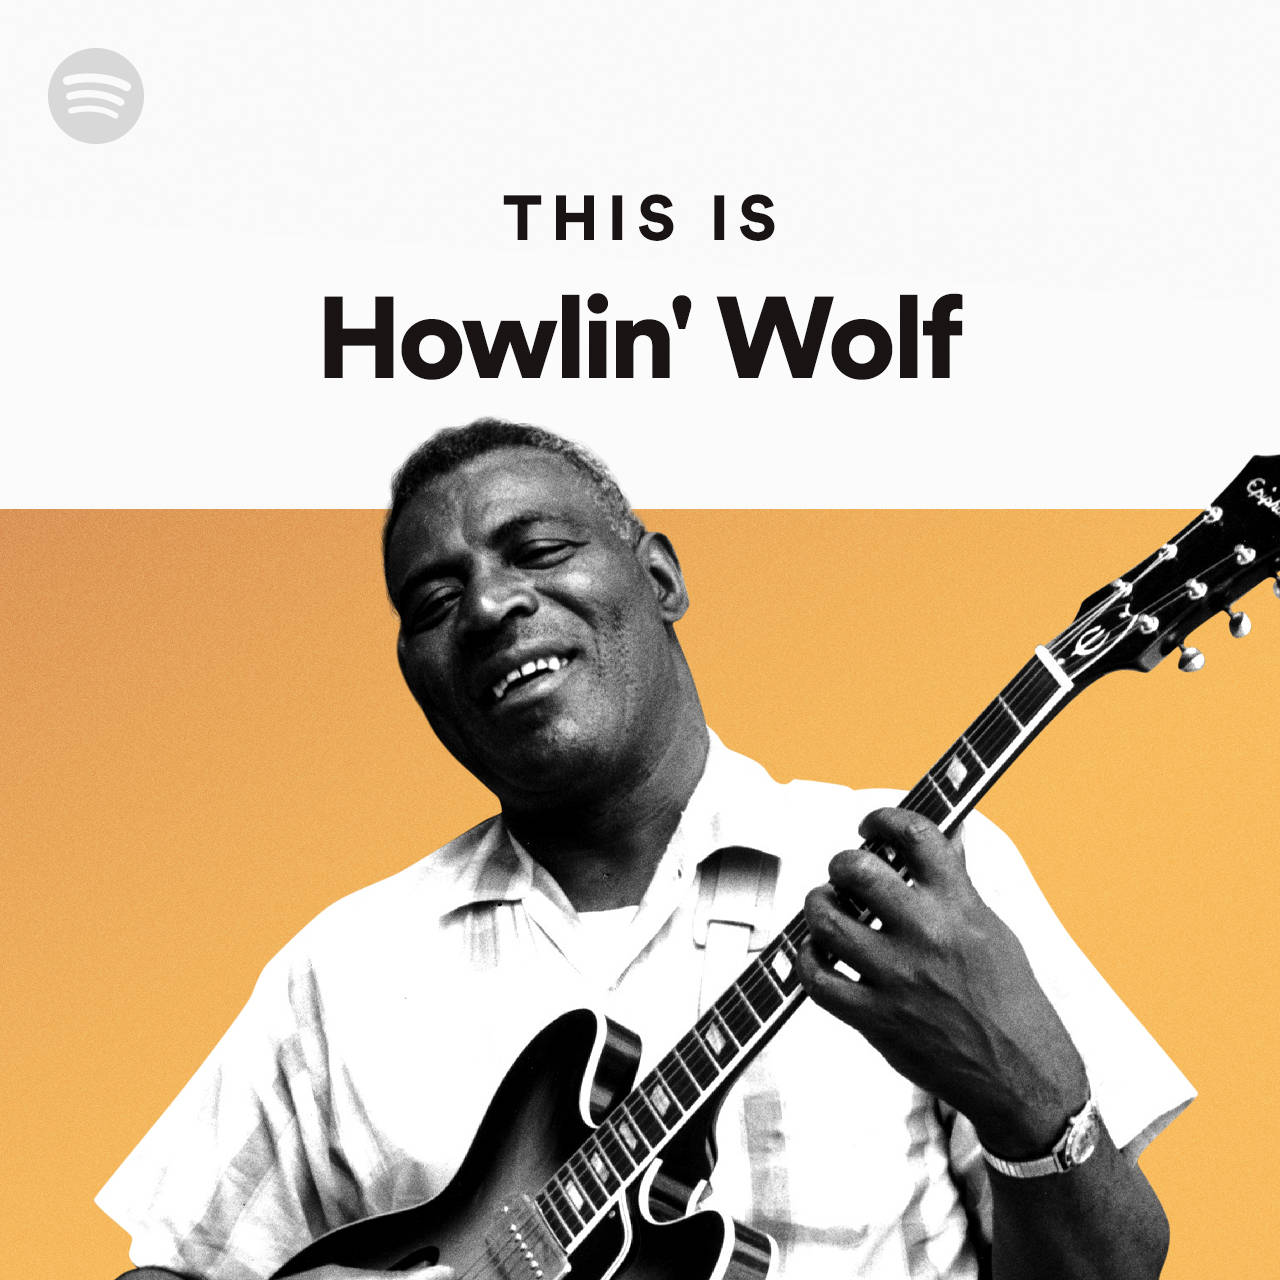 Howlin Wolf Spotify This Is Howlin' Wolf Wallpaper